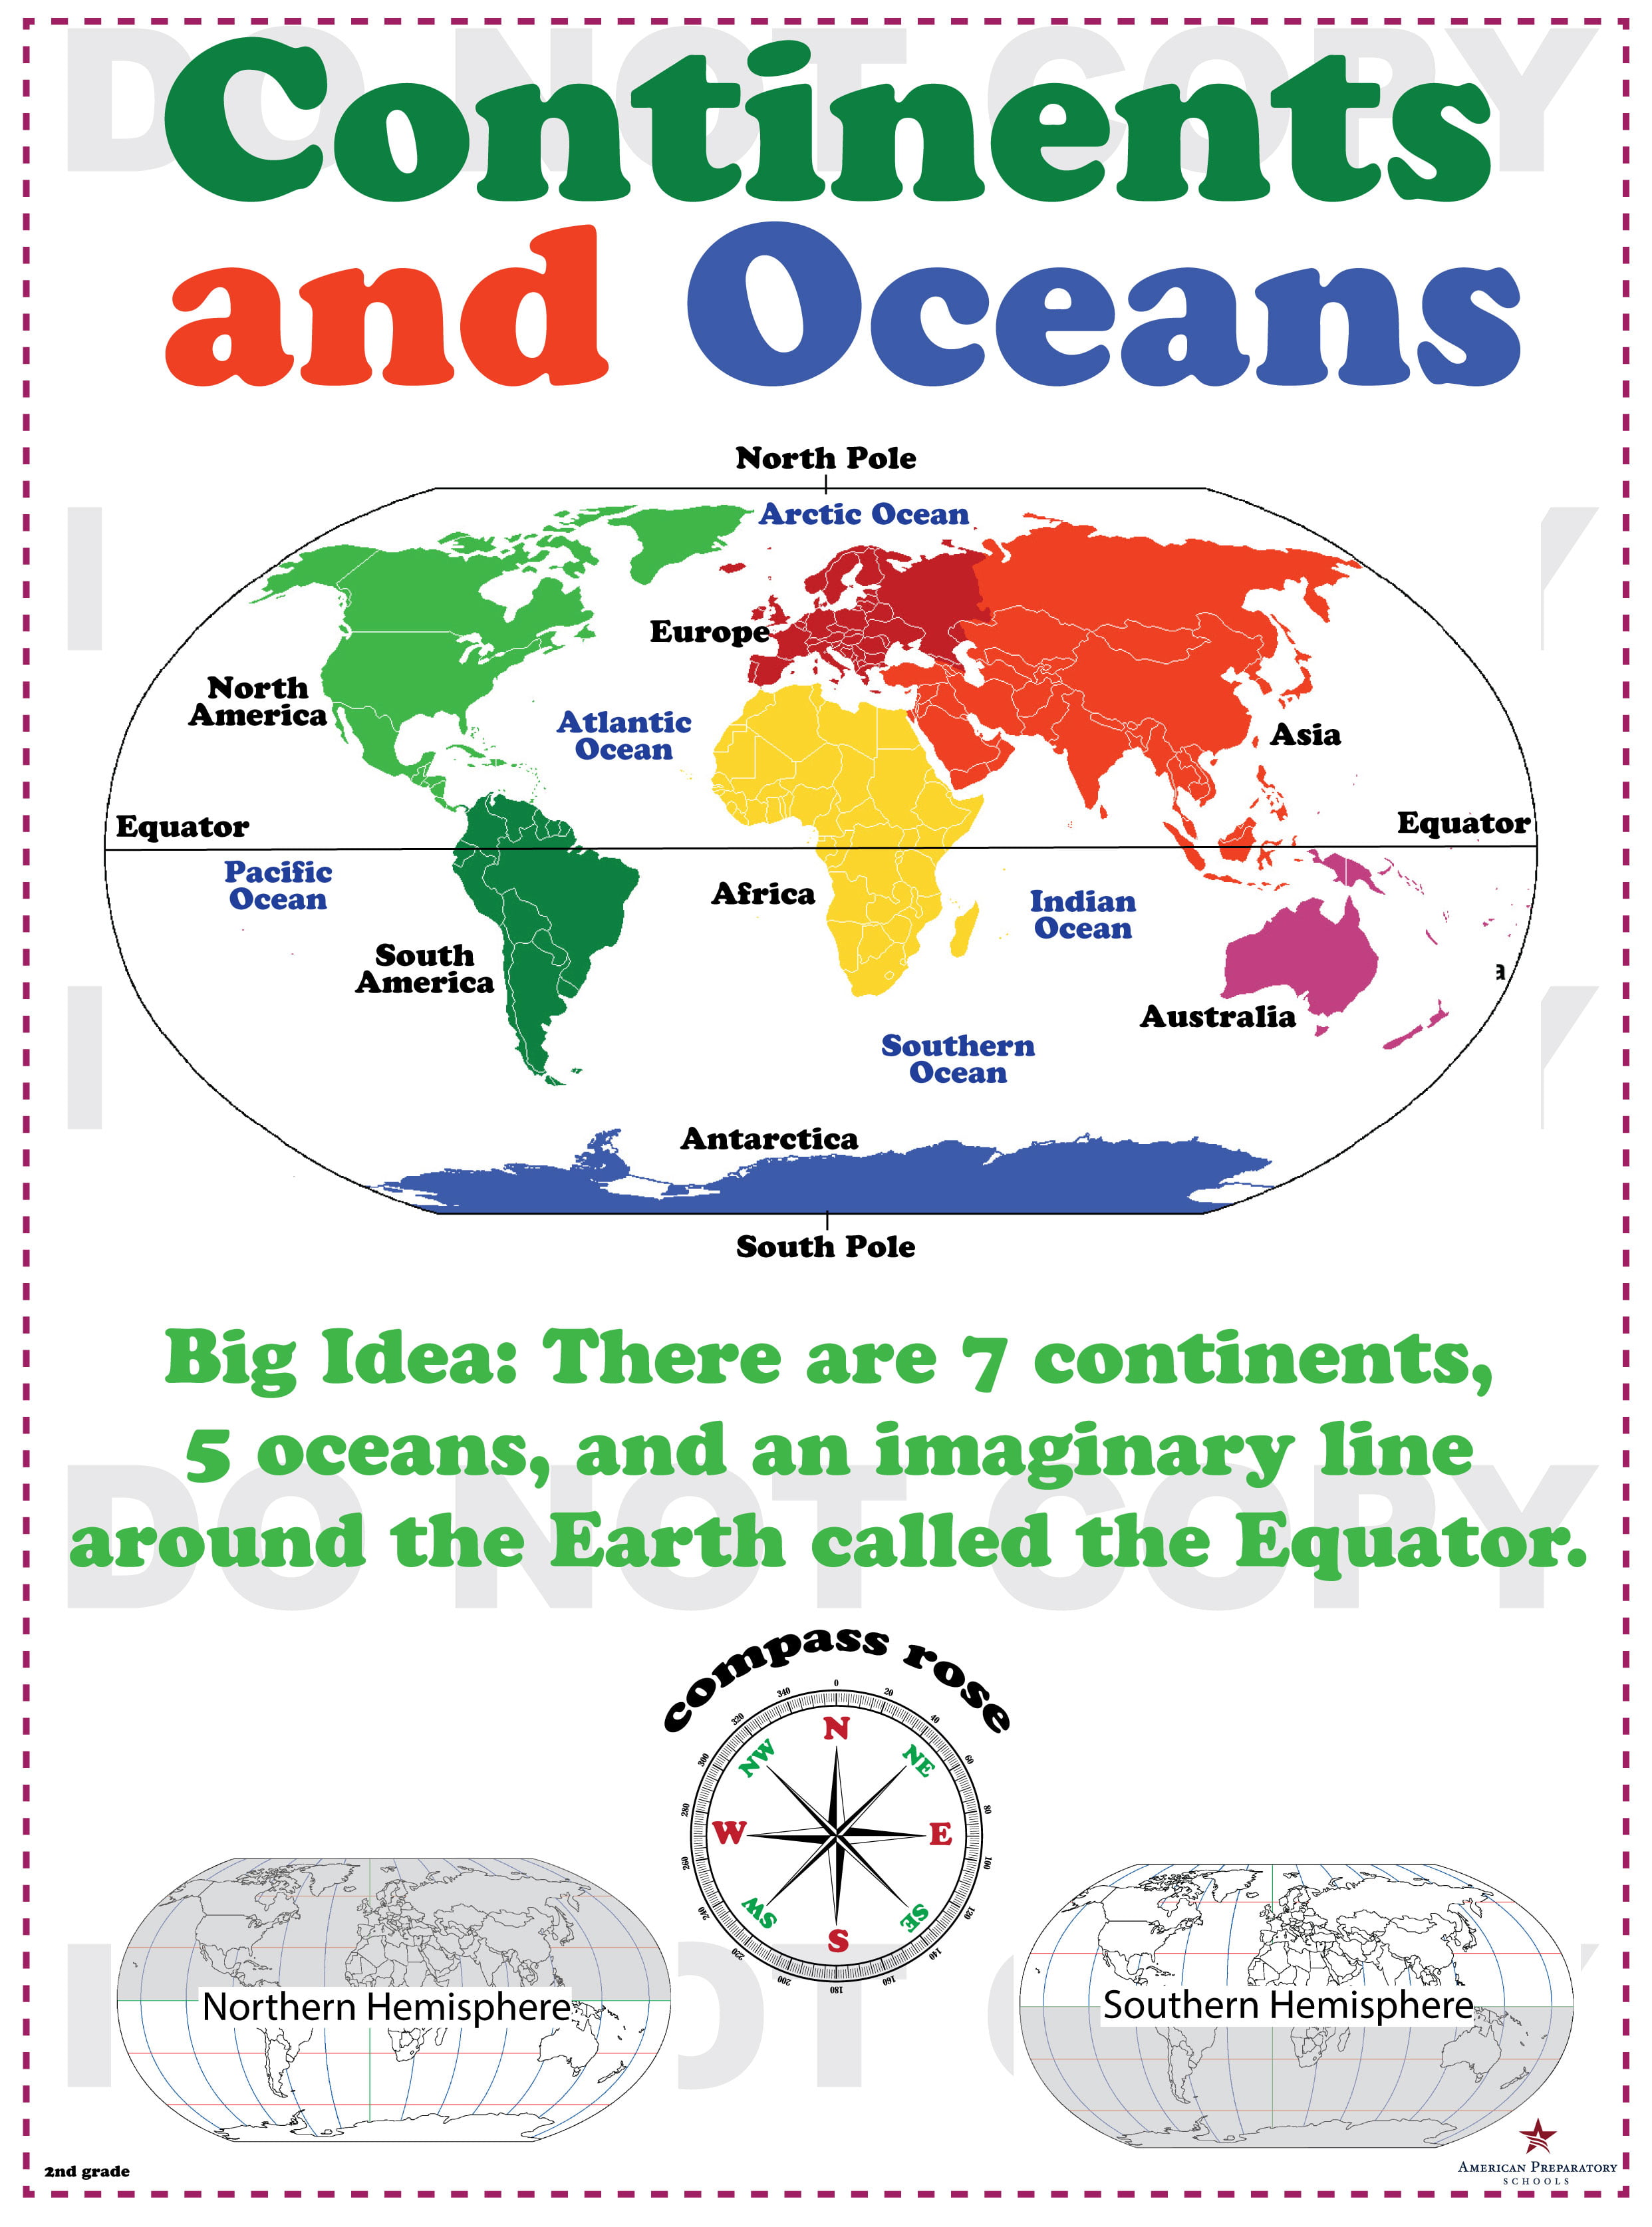 Continents and Oceans - 2nd Grade - American Preparatory Schools